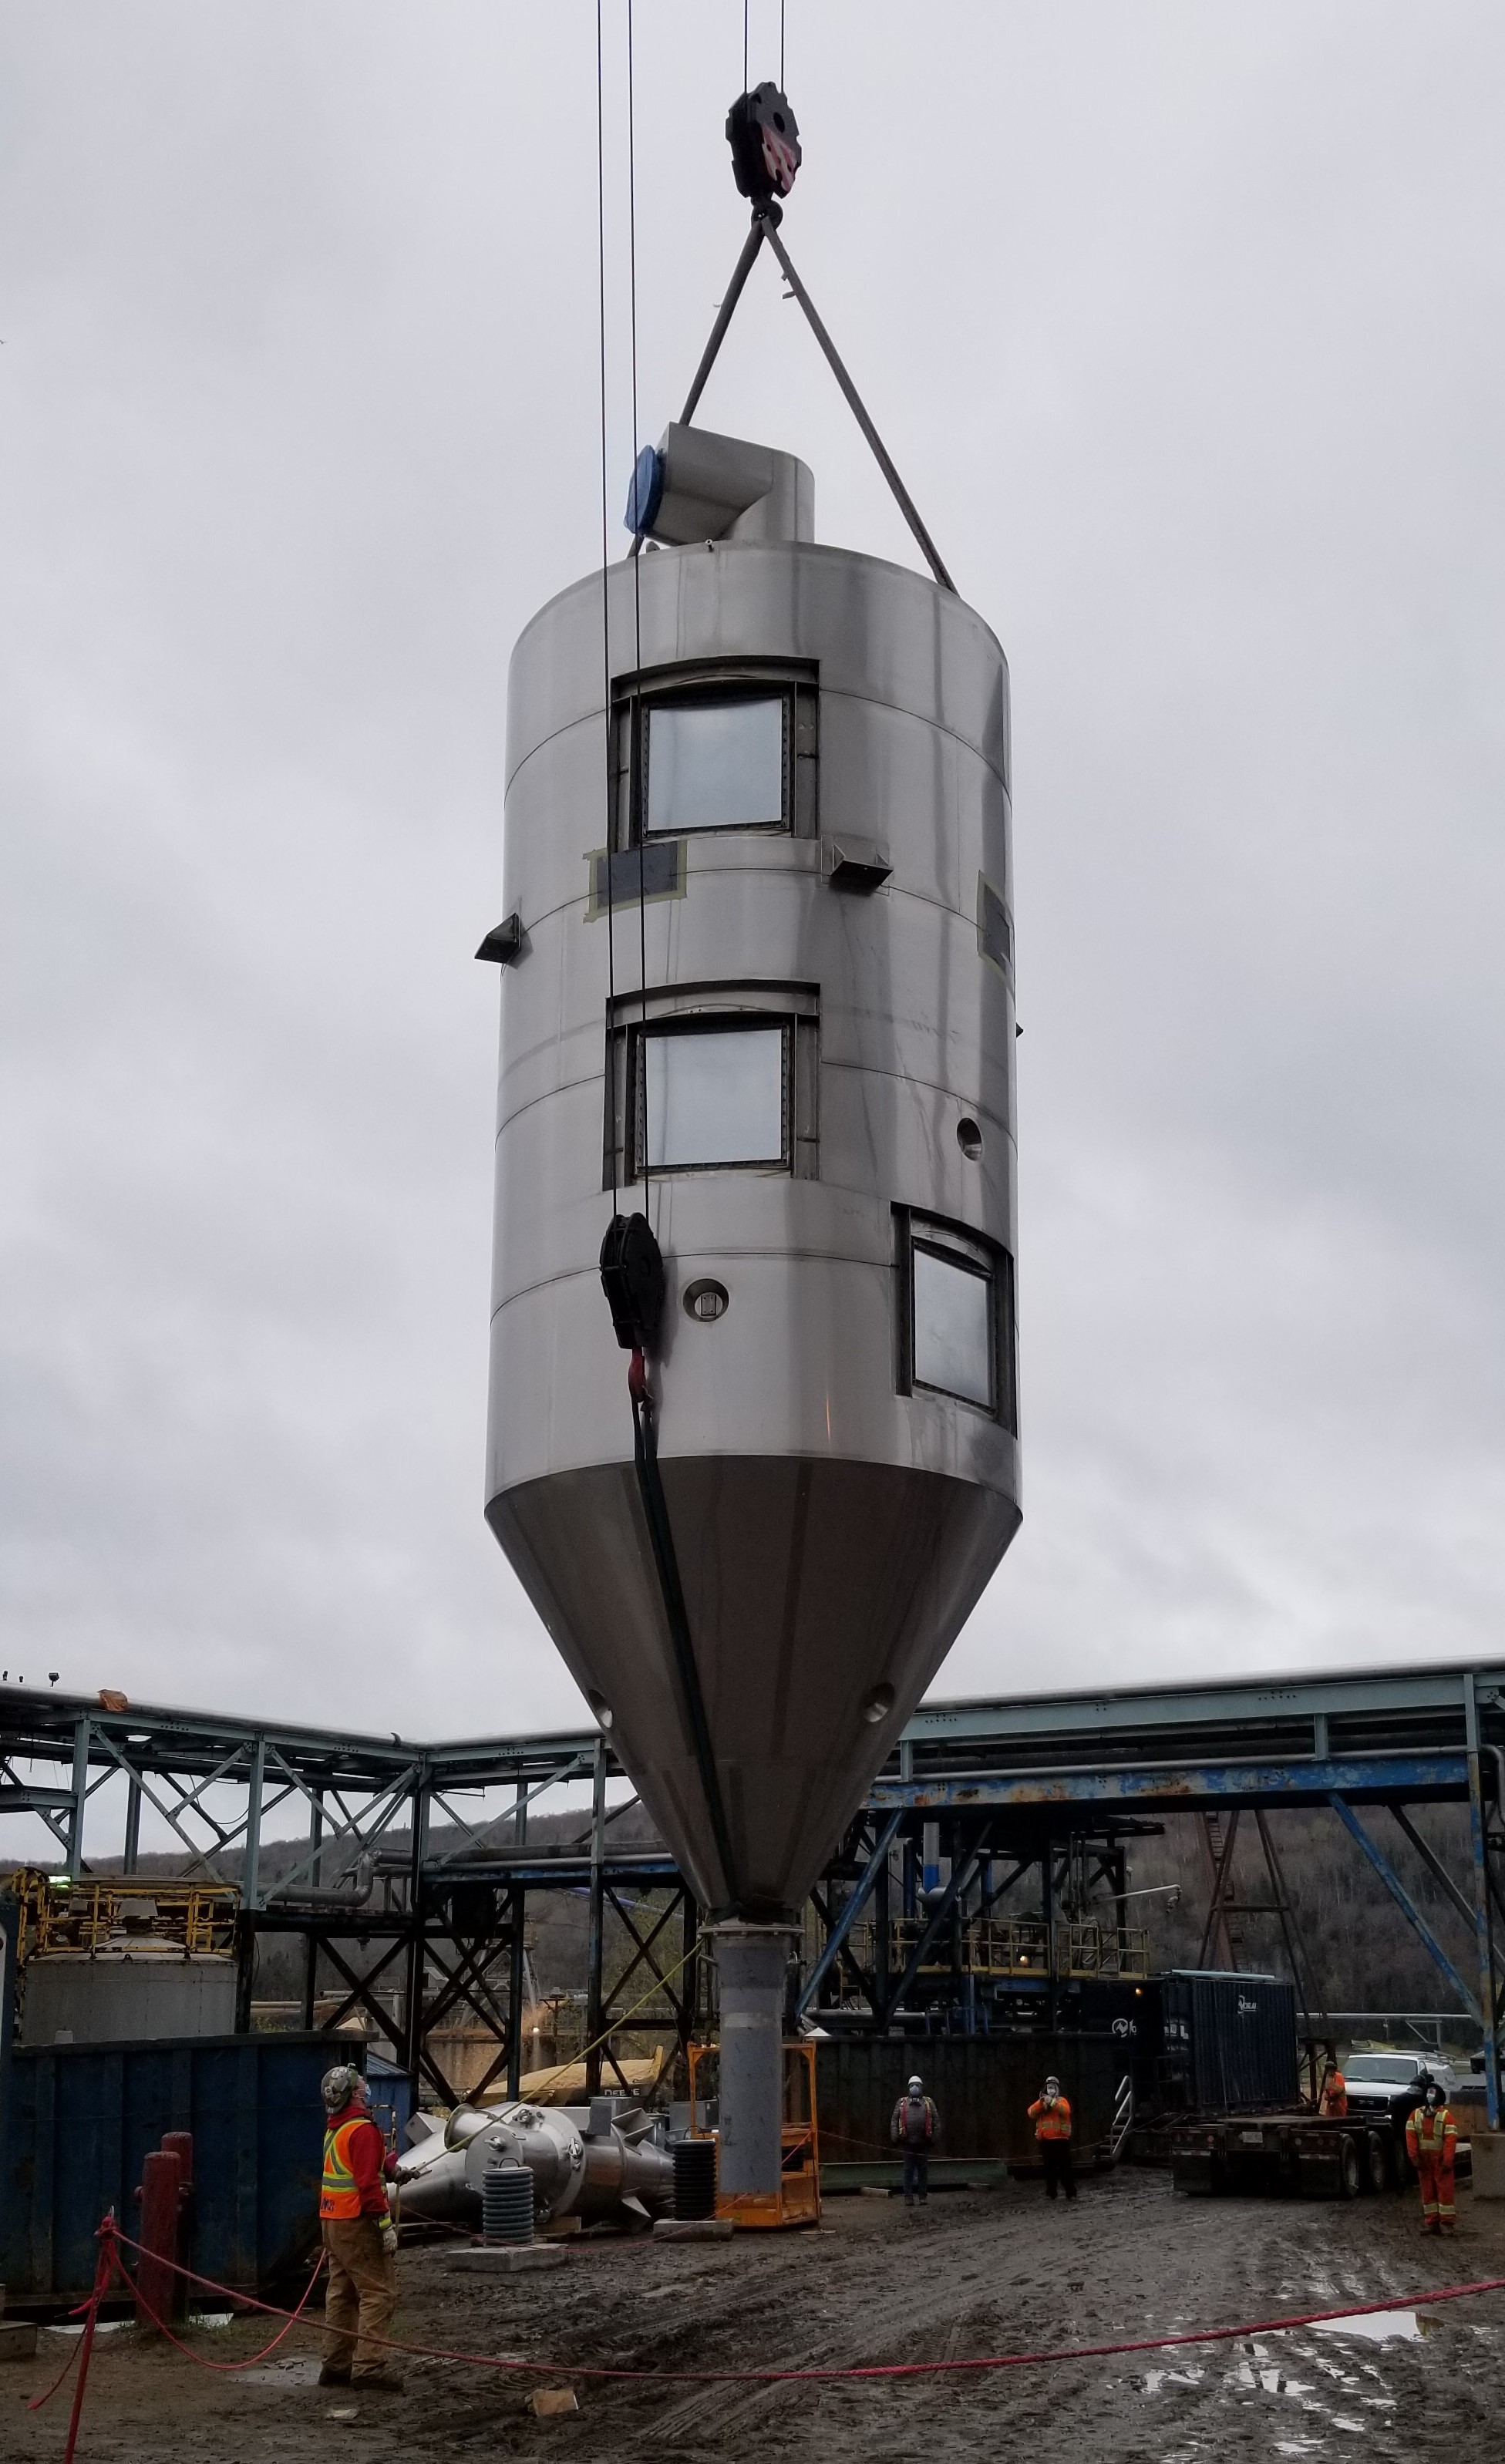 Anomera's 29,100-gallon stainless steel, 5½ story tall spray dryer, that looks like a vintage moon-launch rocket